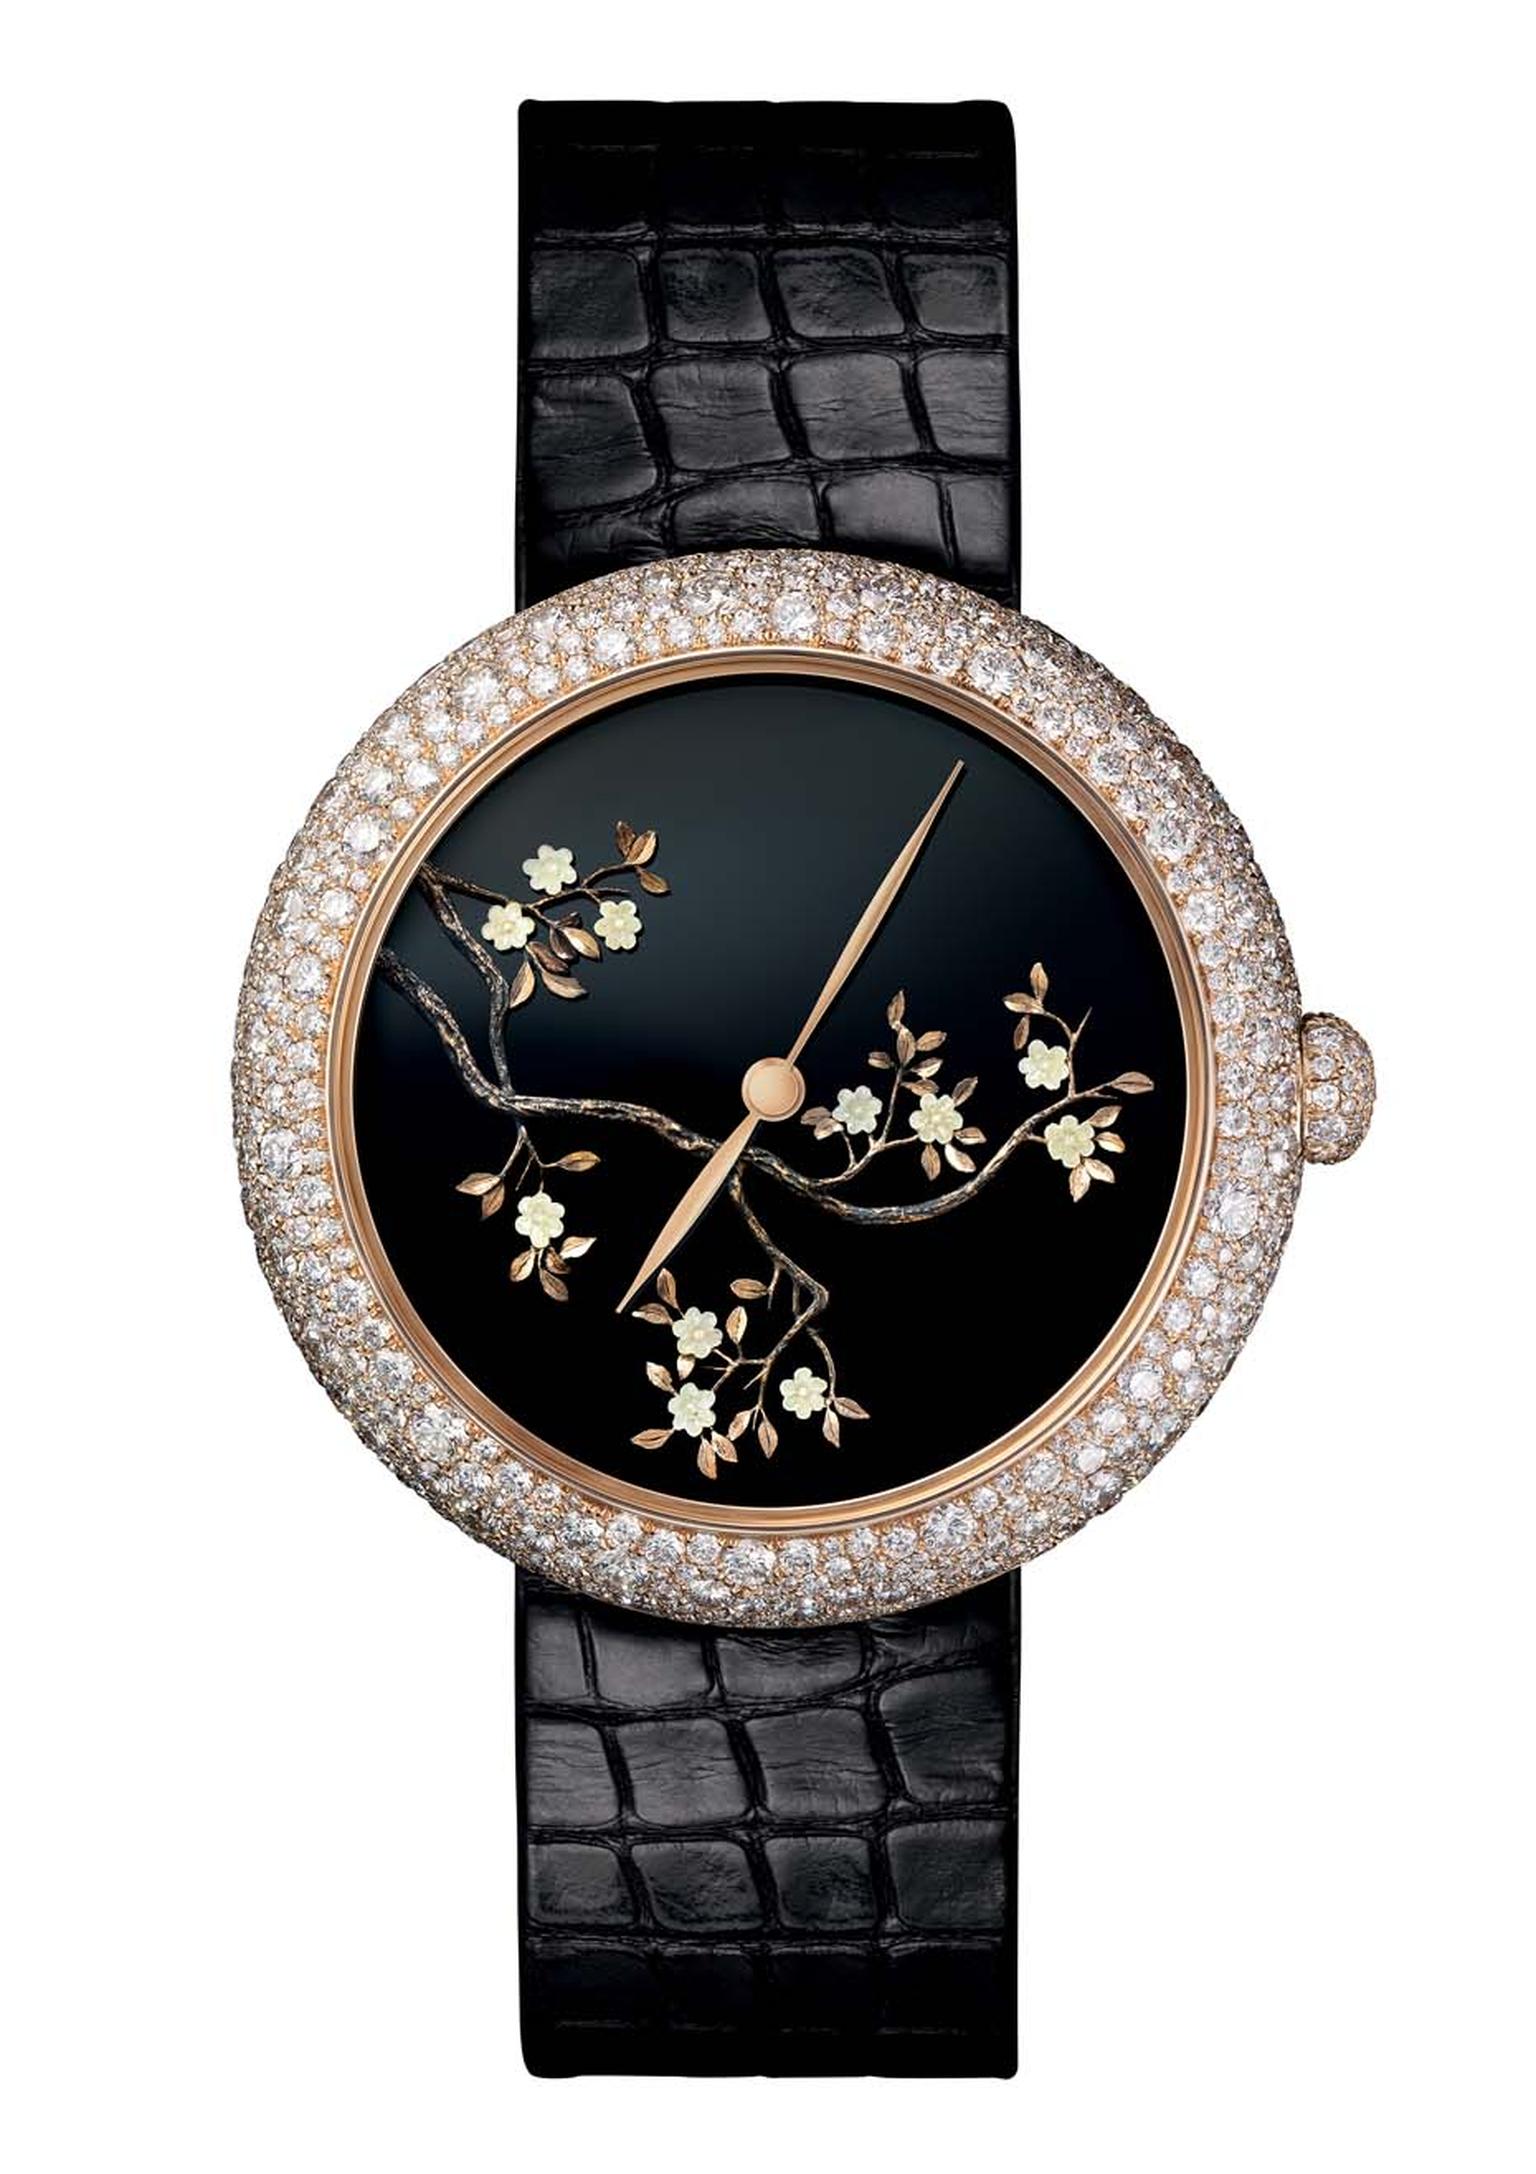 Chanel watches brings yet more insight into the personal spaces of Coco Chanel with this beige gold Coromandel inspired Mademoiselle Privé Décor ladies' watch featuring a floral motif, similar to those adorning the Chinese screens that graced the designer